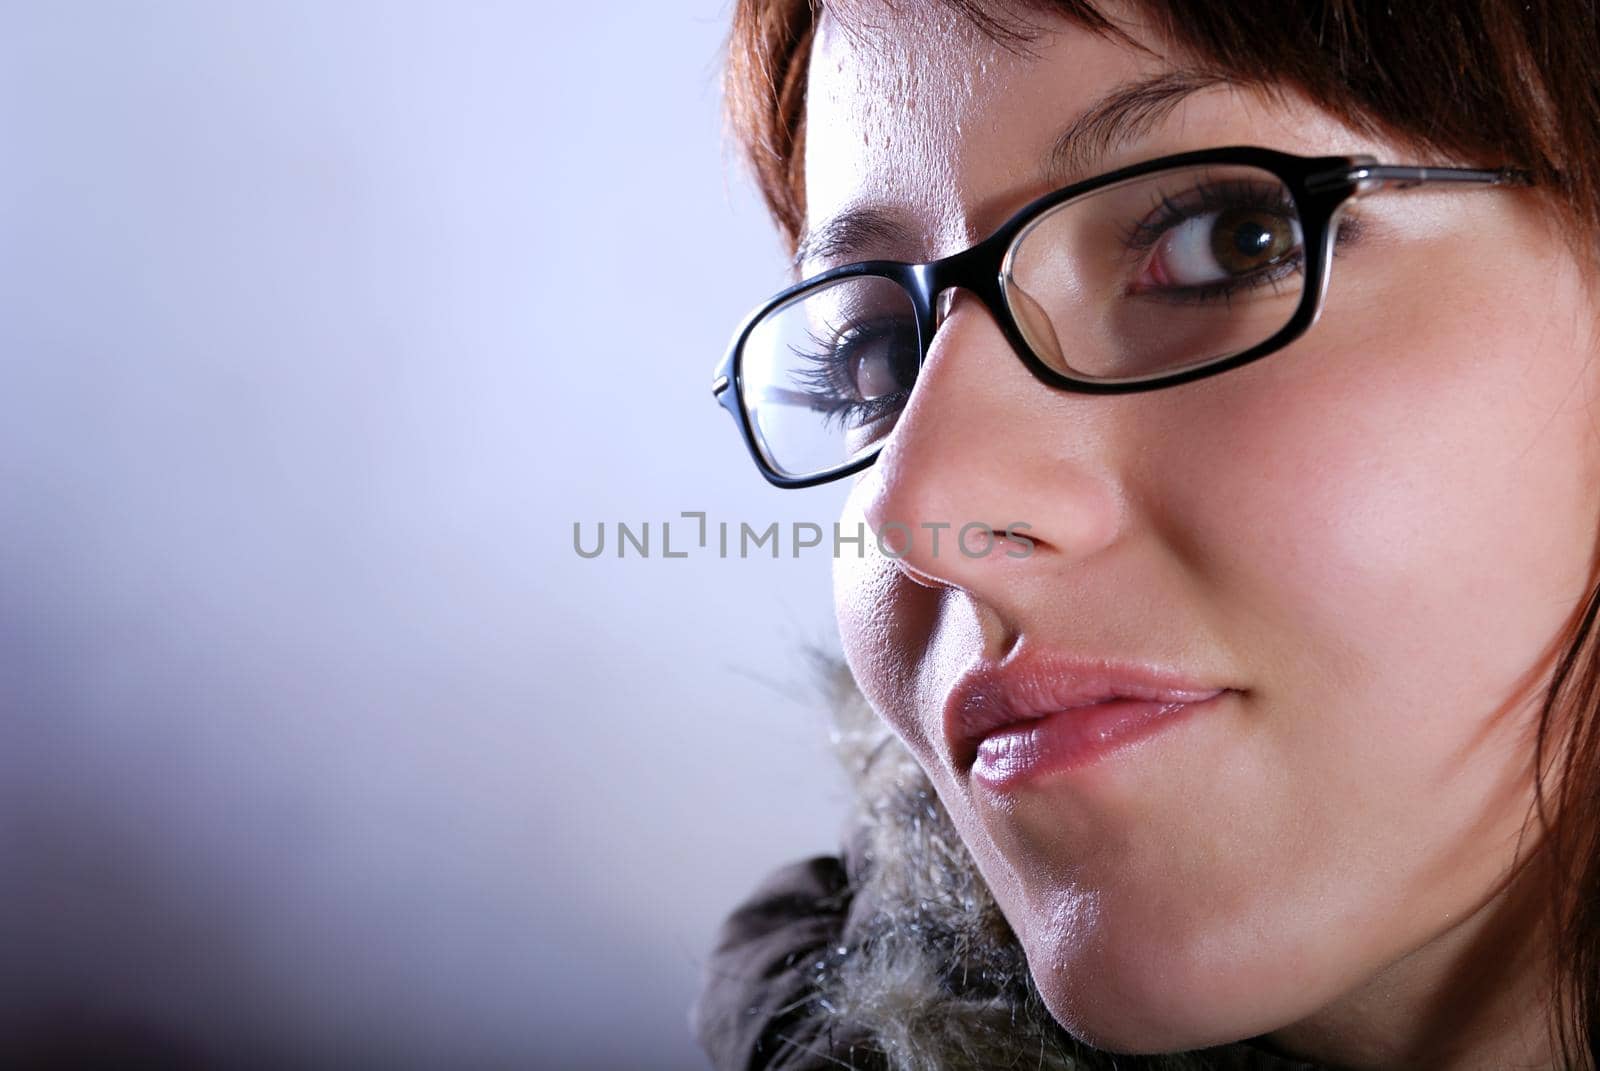 Portrai of a young woman wearing glasses